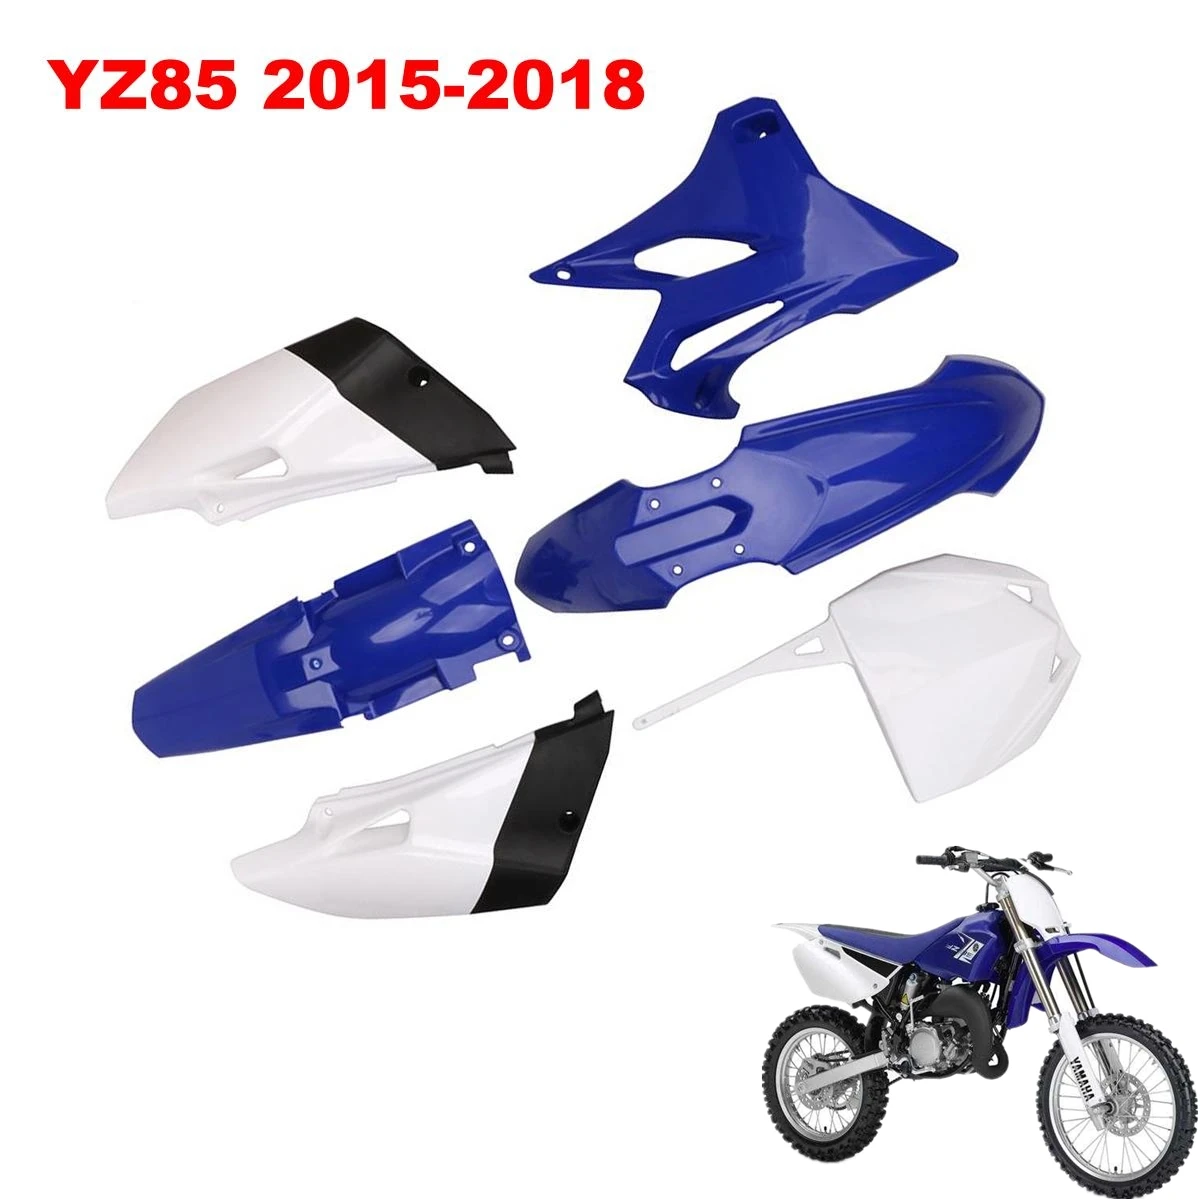 Motorcycle Plastic Fairing Fenders Number Plate Shrouds Side Panels For Yamaha YZ85 YZ 85 2015 2016 2017 2018 15 16 17 18